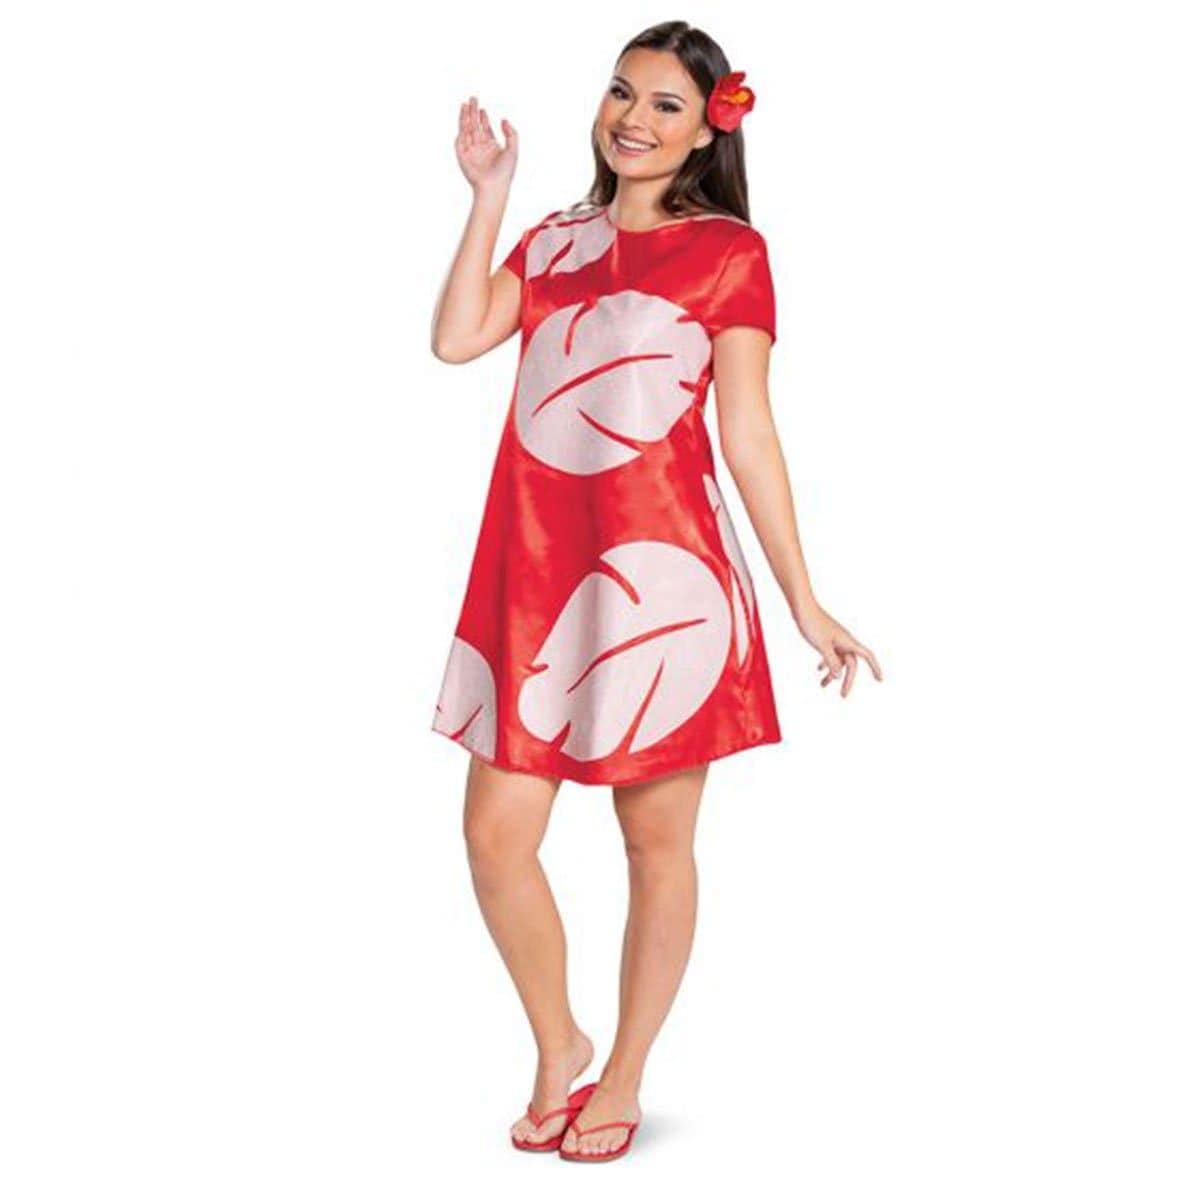 Buy Costumes Lilo Deluxe Costume for Adults, Lilo & Stitch sold at Party Expert